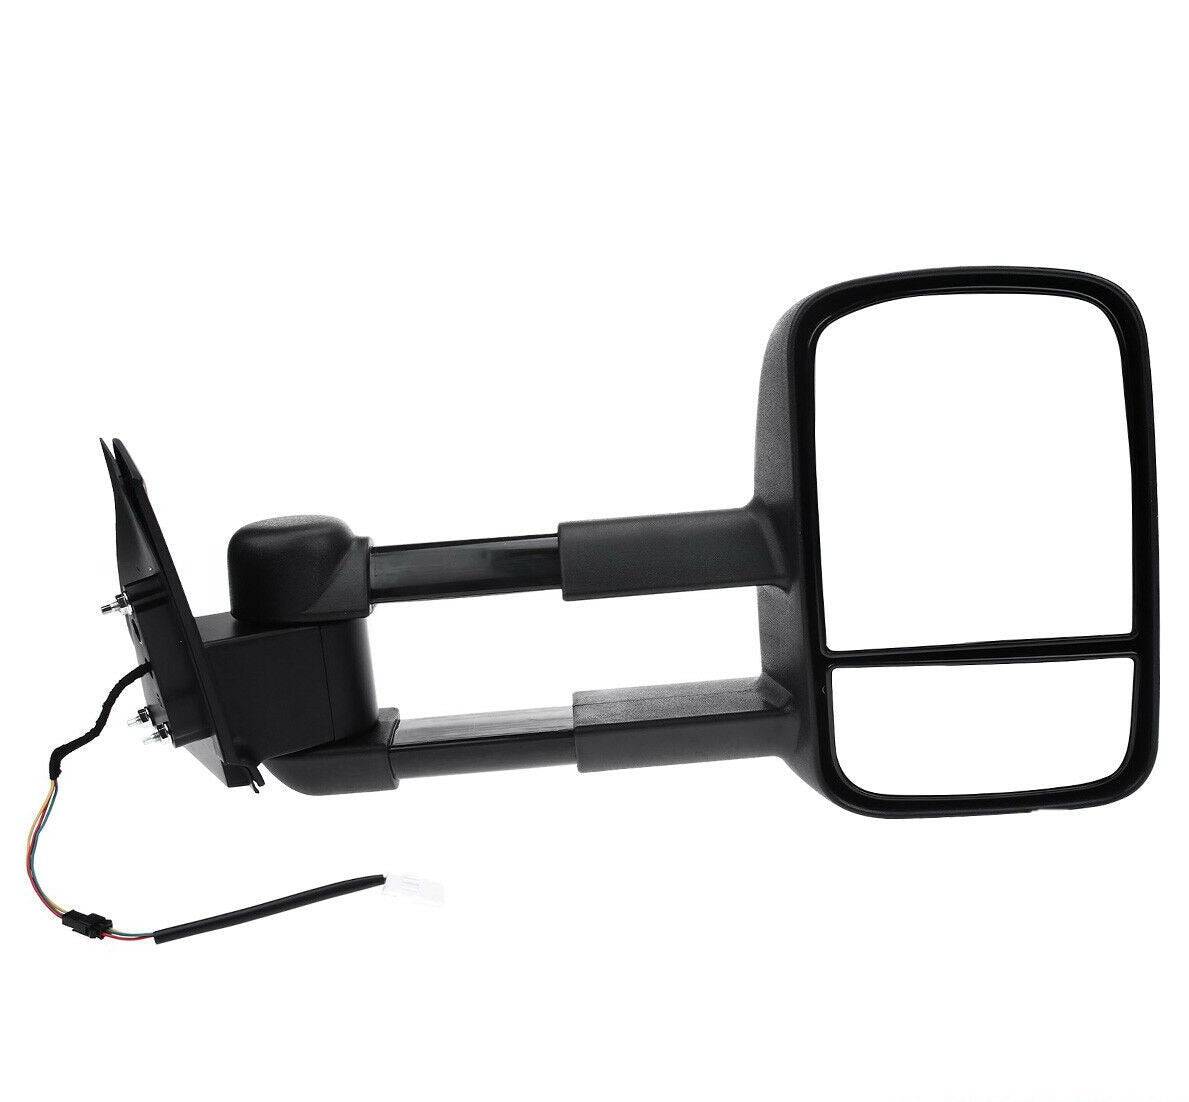 Extendable Towing Mirrors suits Mitsubishi Pajero (Non Blinker)